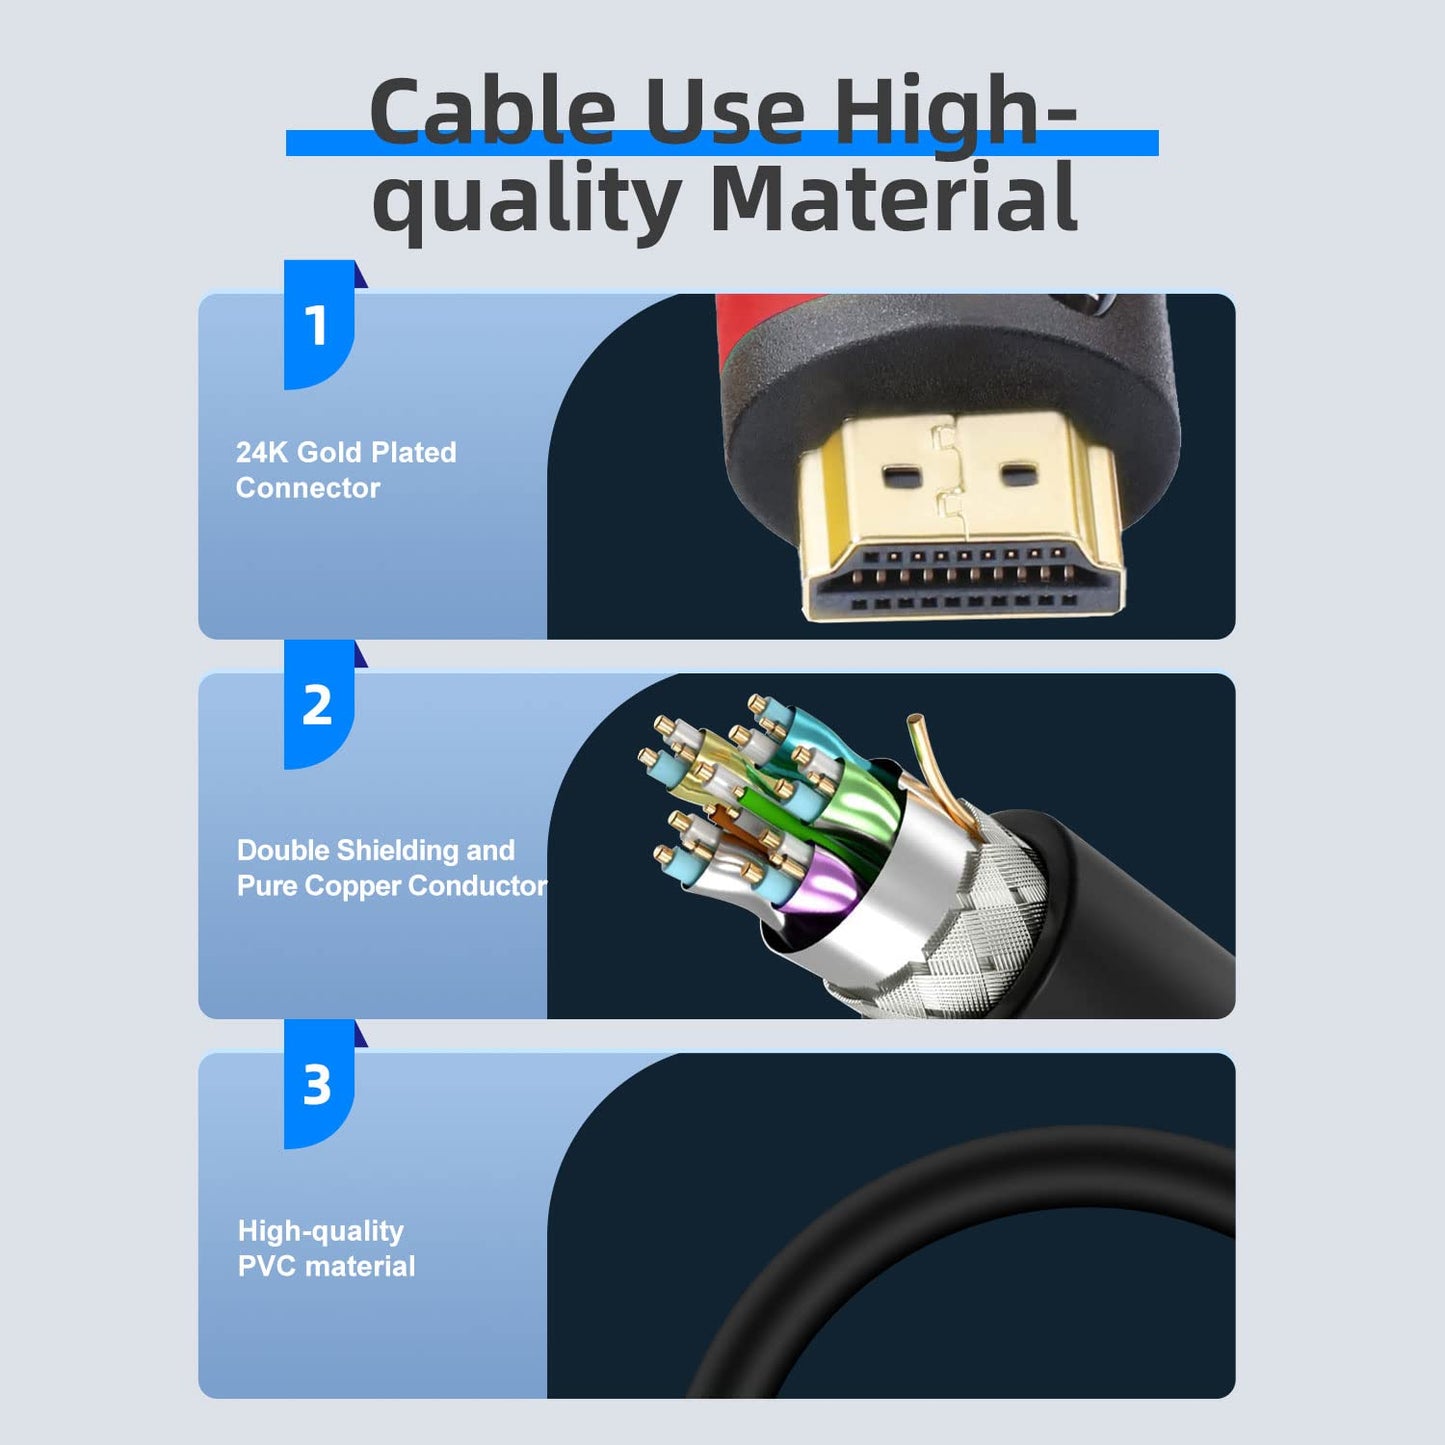 Postta HDMI Cable(75 Feet Blue) HDMI 2.0V with Built-in Signal Booster-Support 4K,3D,1080P,Ethernet,Audio Return-1 Pack